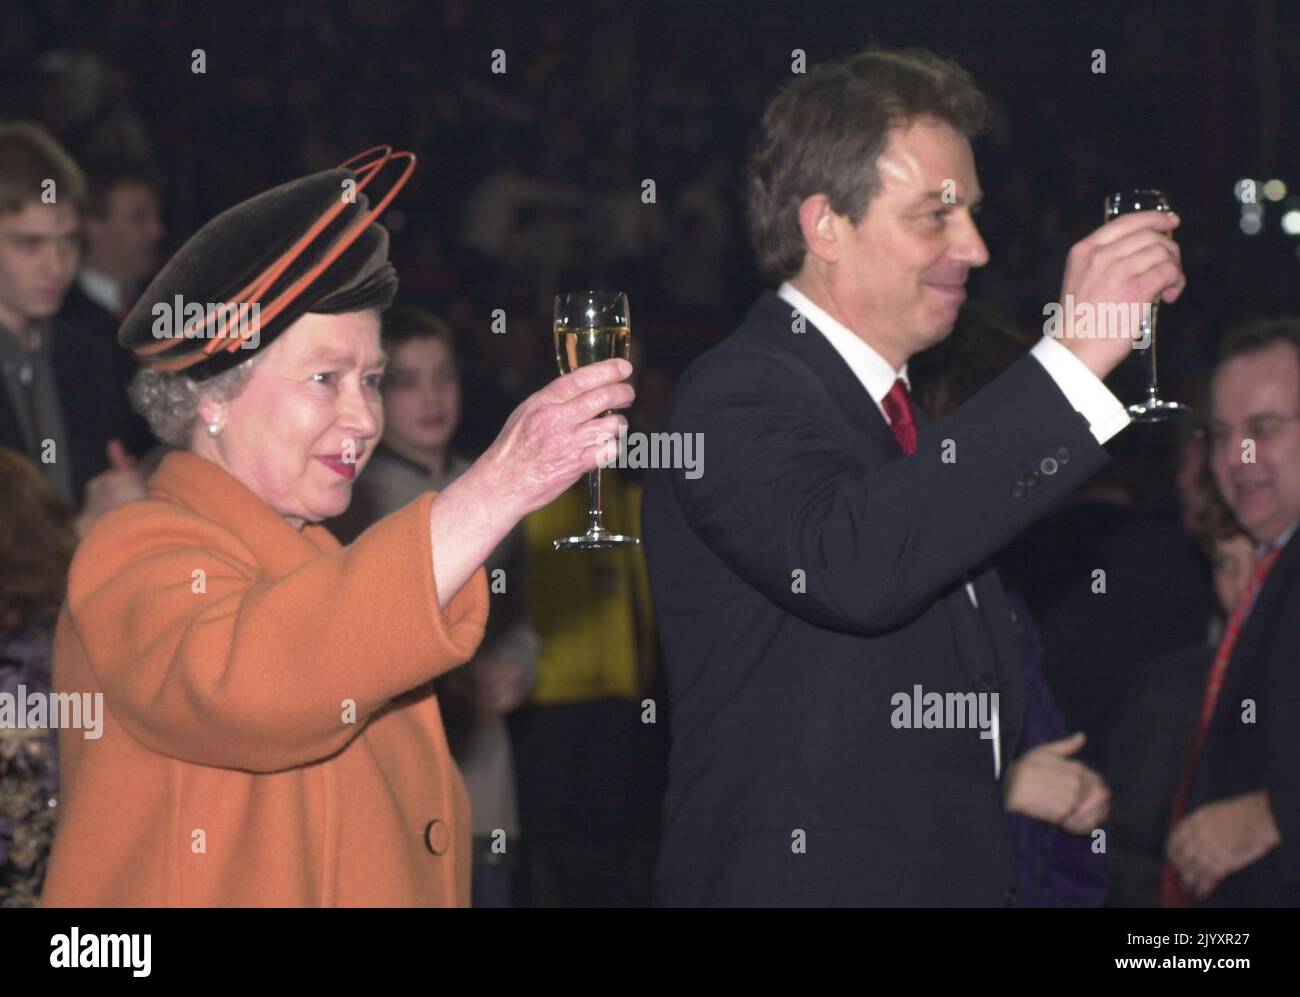 File photo dated 1/1/2001 of Queen Elizabeth II and British Prime Minister Tony Blair raising their glasses as midnight strikes during the Opening Celebrations at the Millennium Dome in Greenwich in SE London. The Queen saw 13 Prime Ministers come and go during her reign - with Boris Johnson as the 14th. Issue date: Thursday September 8, 2022. Stock Photo